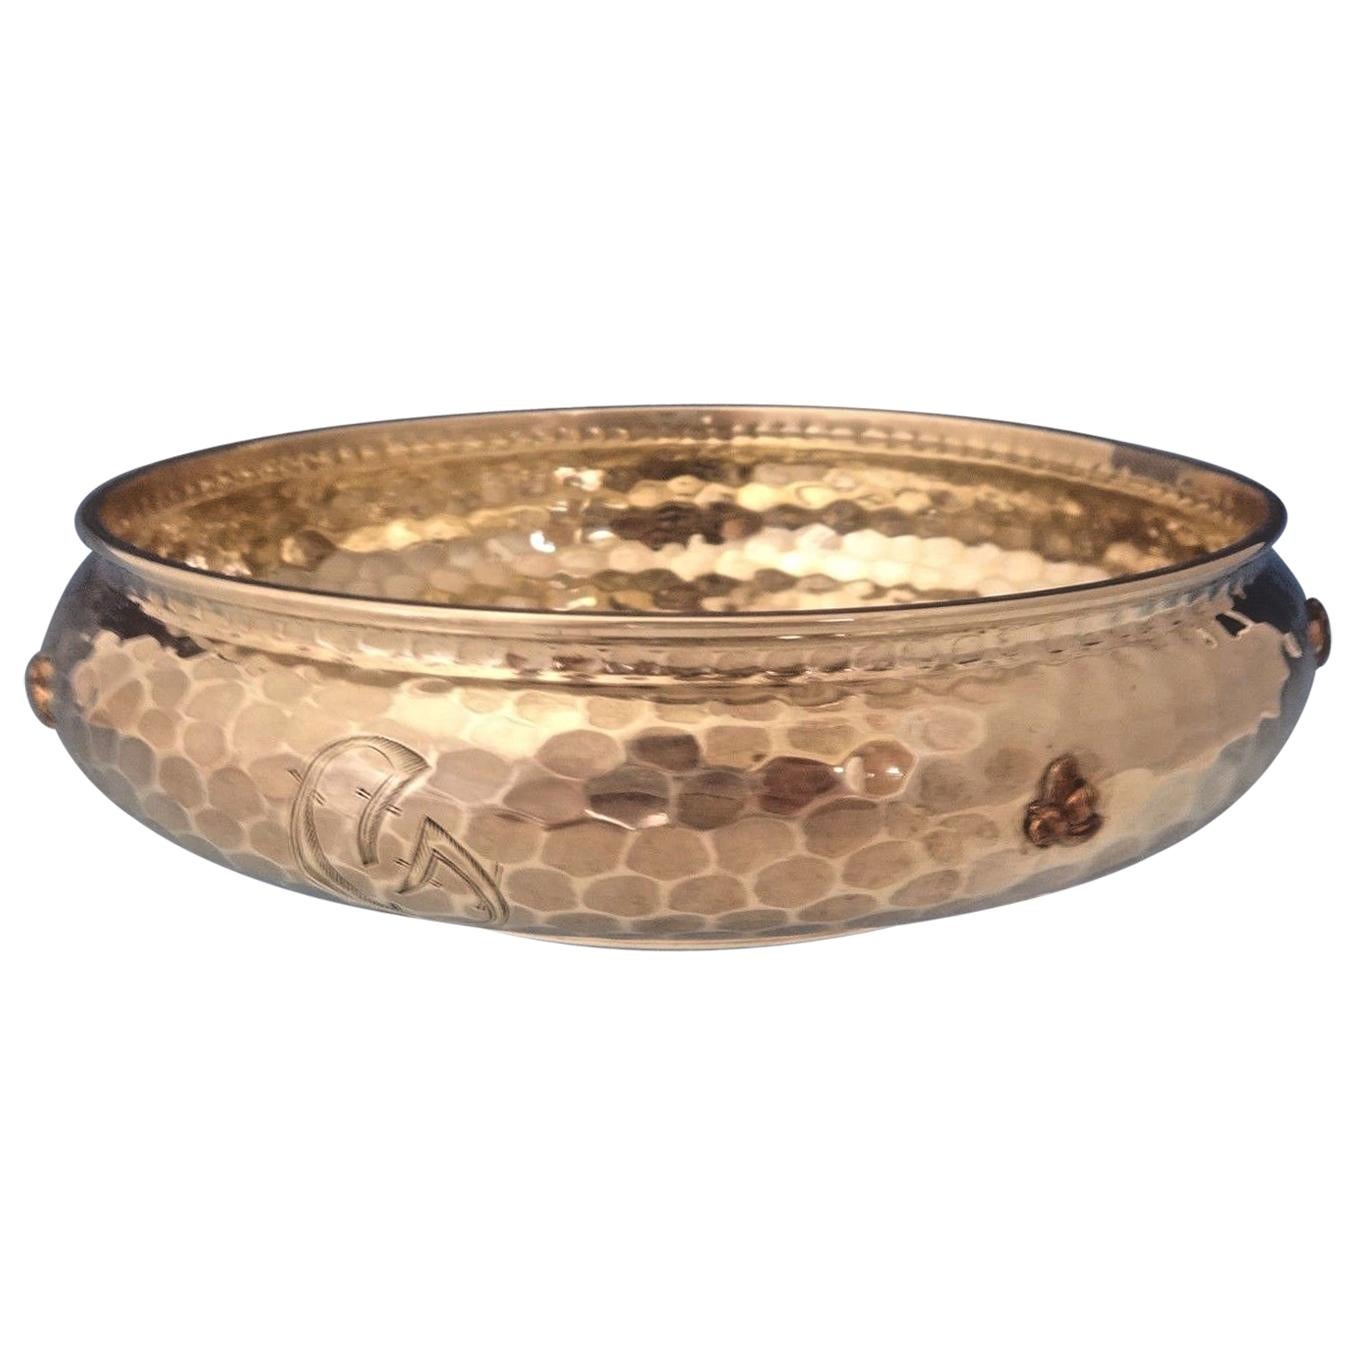 Mixed Metals by Whiting Sterling Silver Bowl with Applied Copper Bees